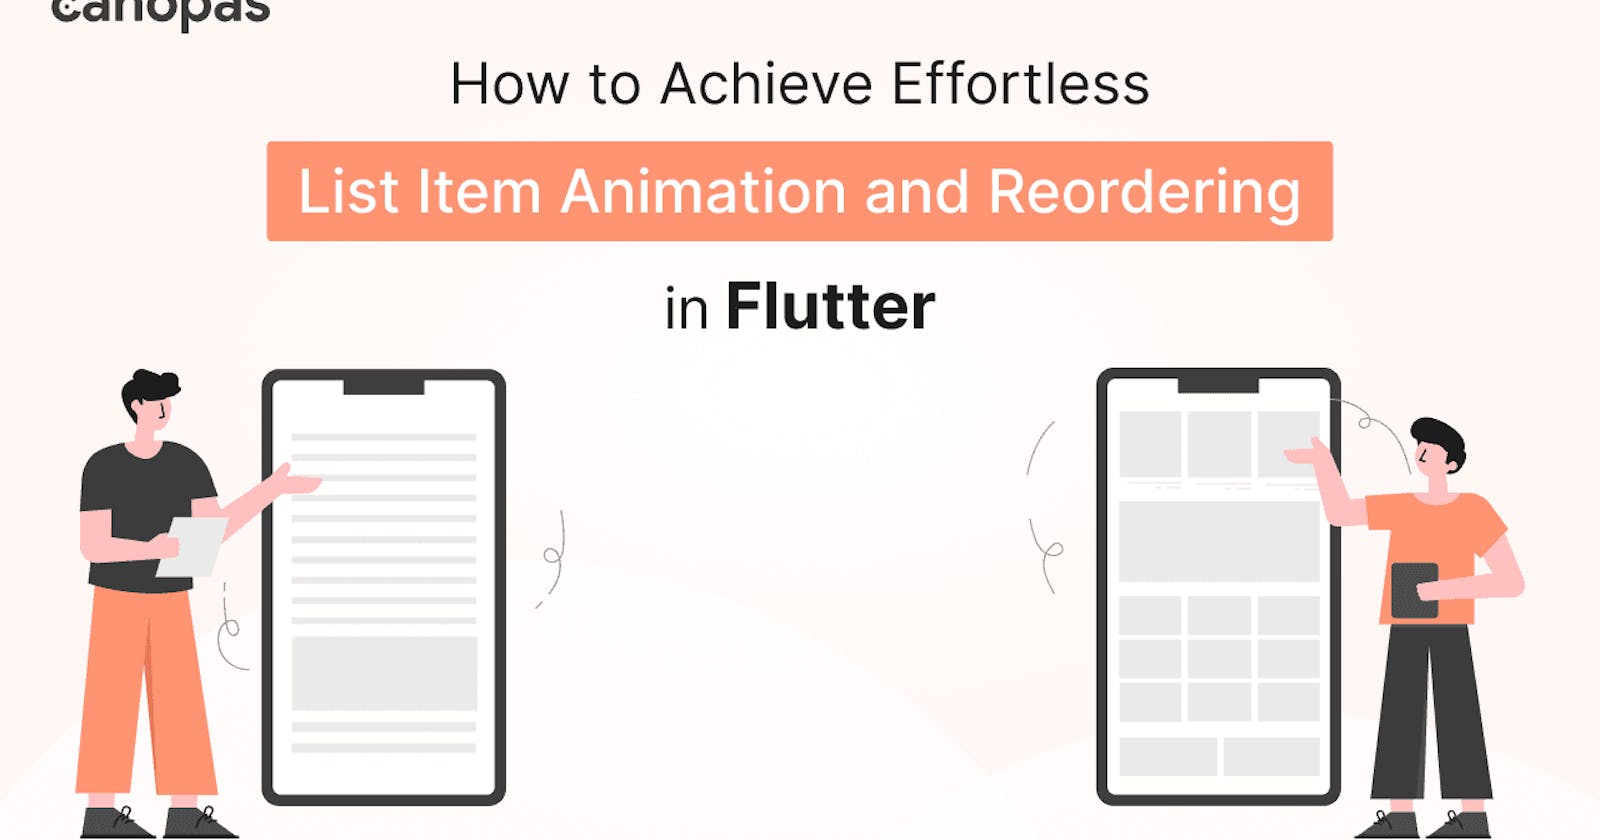 How to Achieve Effortless List Item Animation and Reordering in Flutter